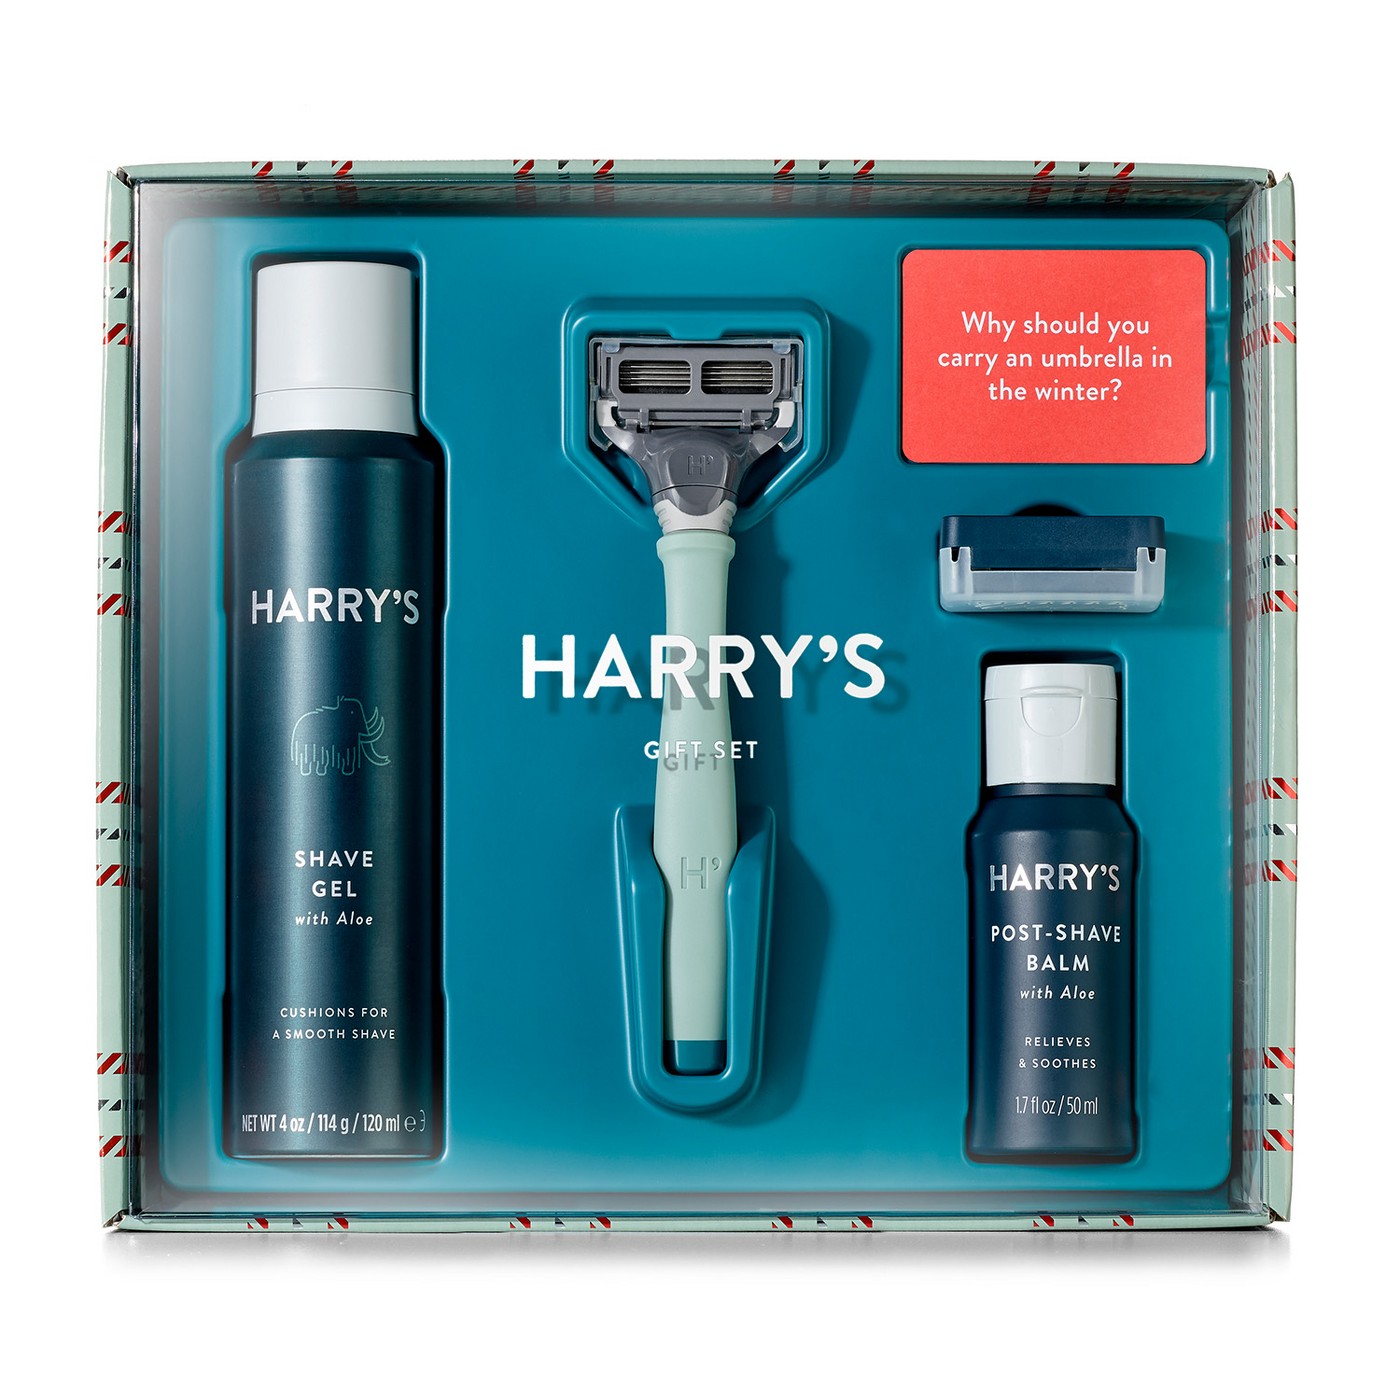 Cool affordable gifts under $15: Harry's Holiday Shave Kit